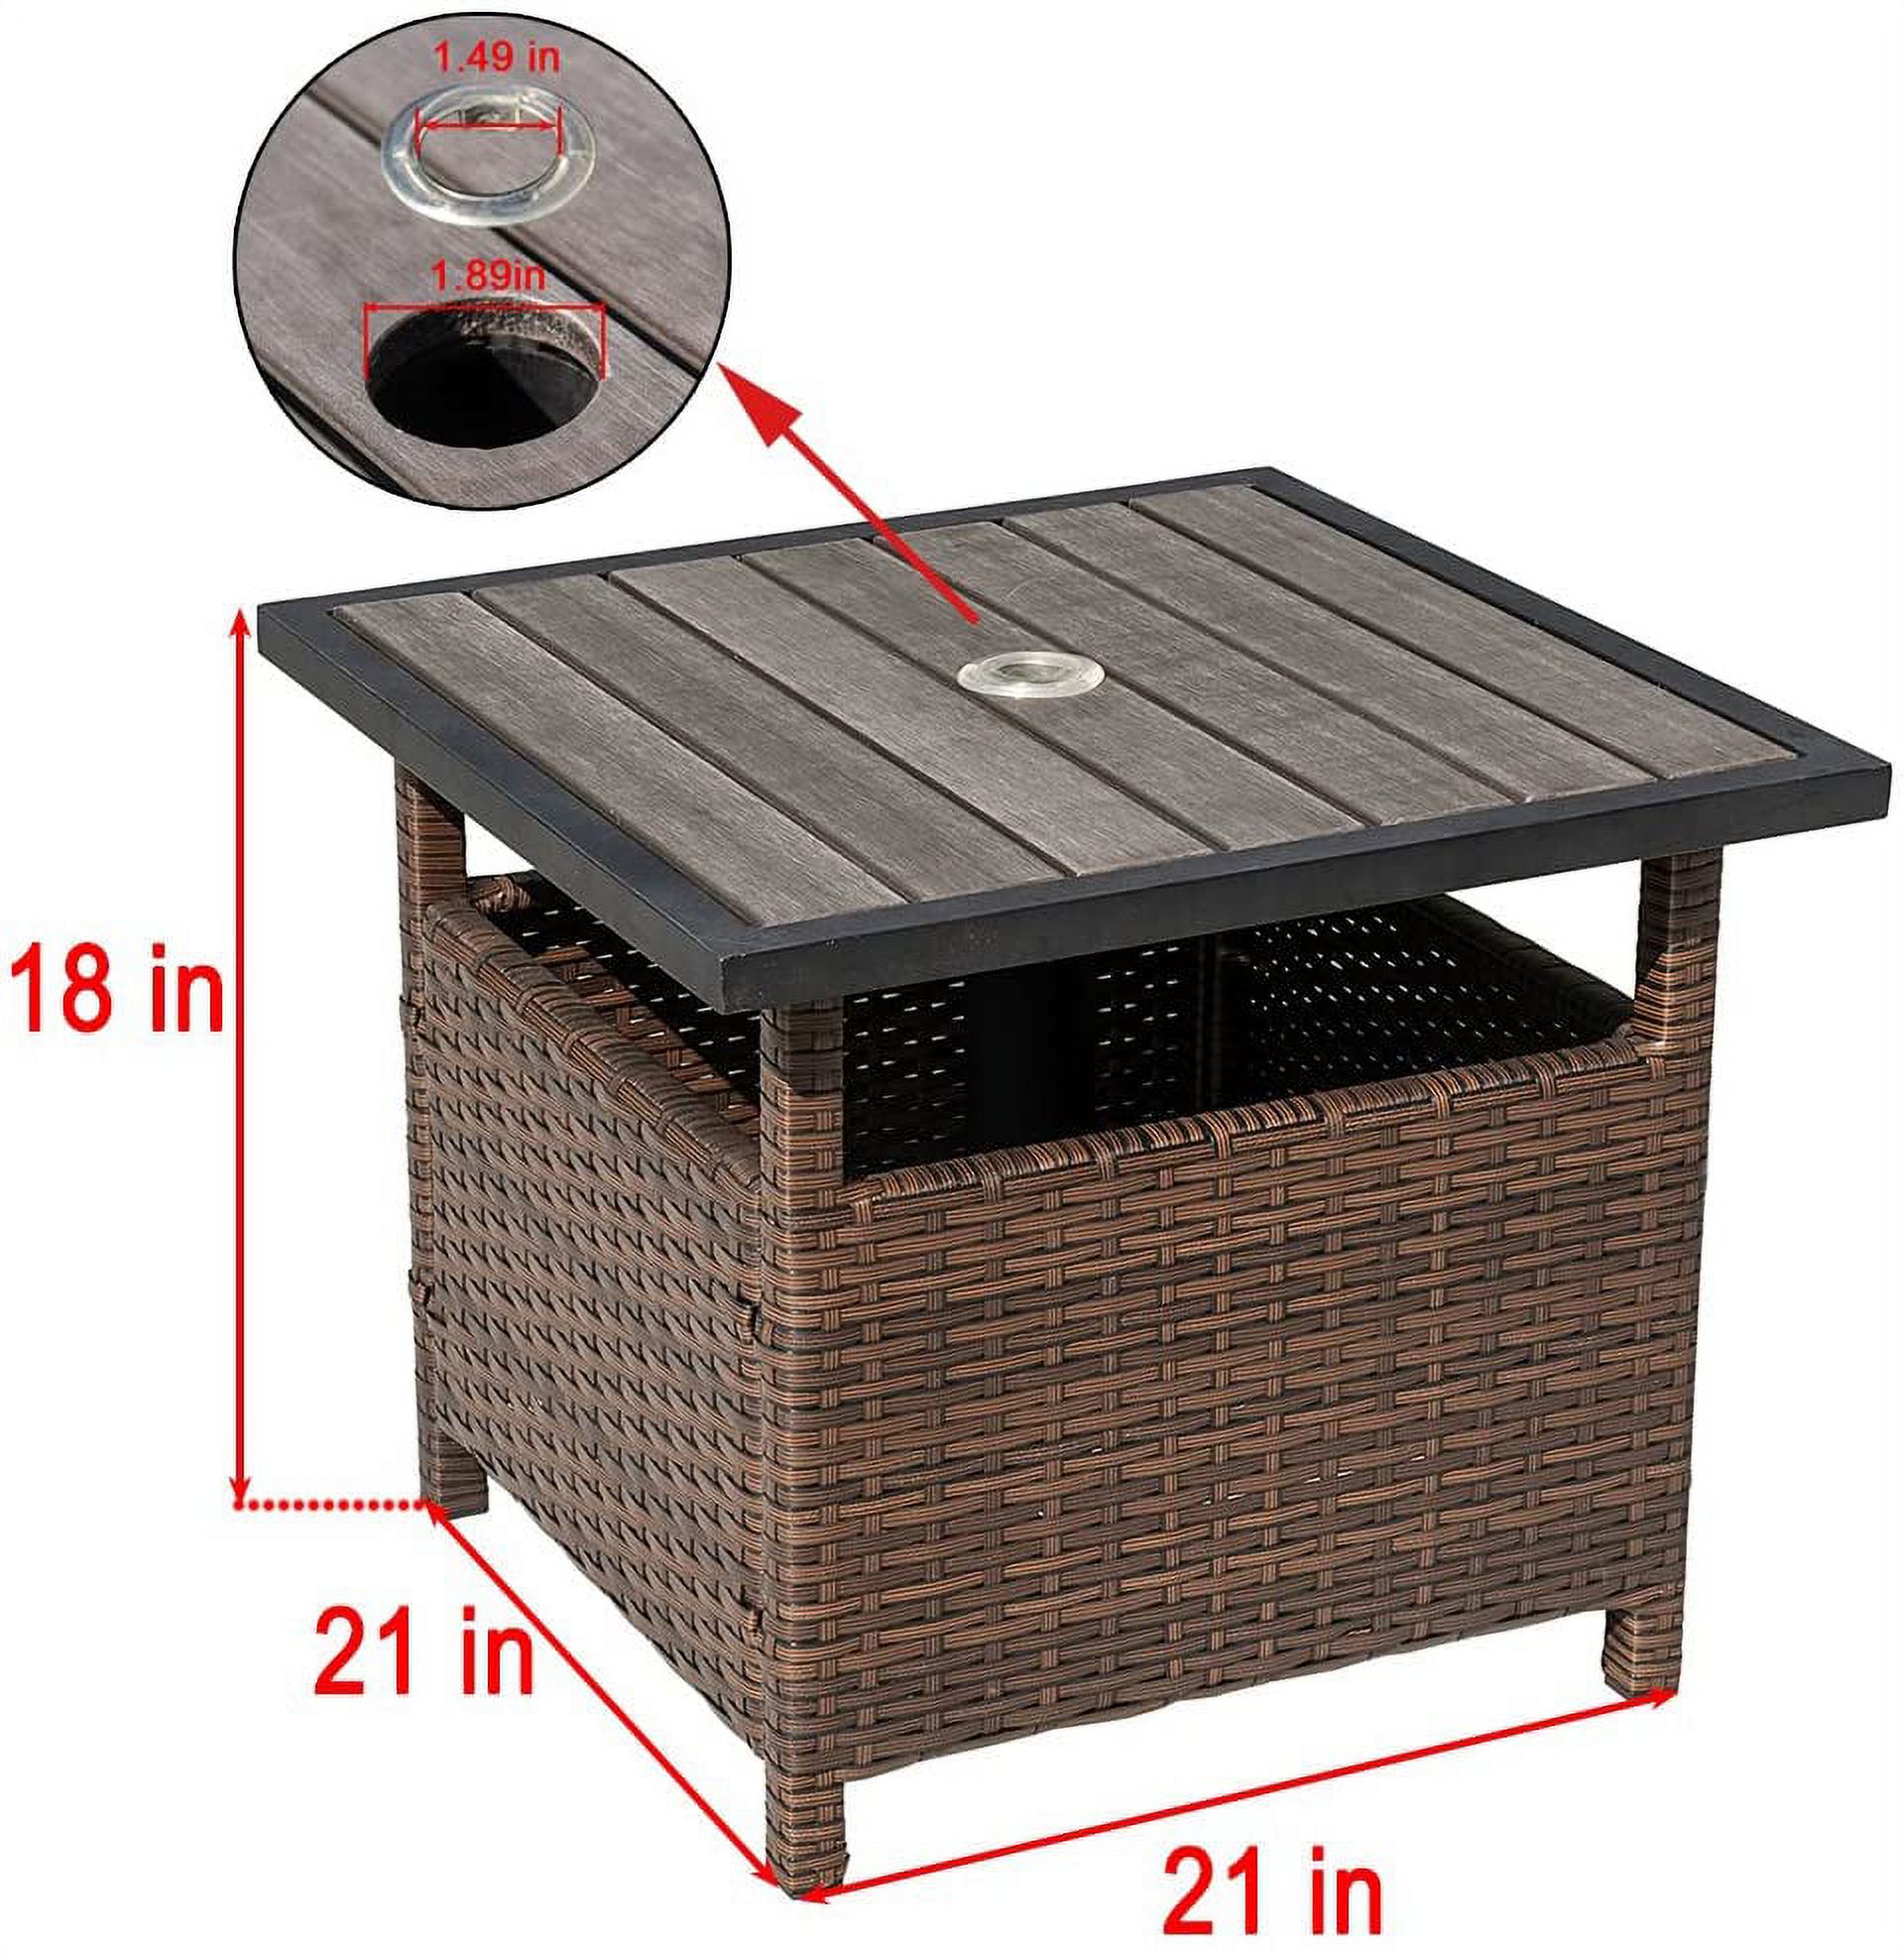 Patio Table with Umbrella Hole Small Outdoor Side Table All-Wather Faux Wicker Rettan Umbrella Stand, Brown - image 2 of 7